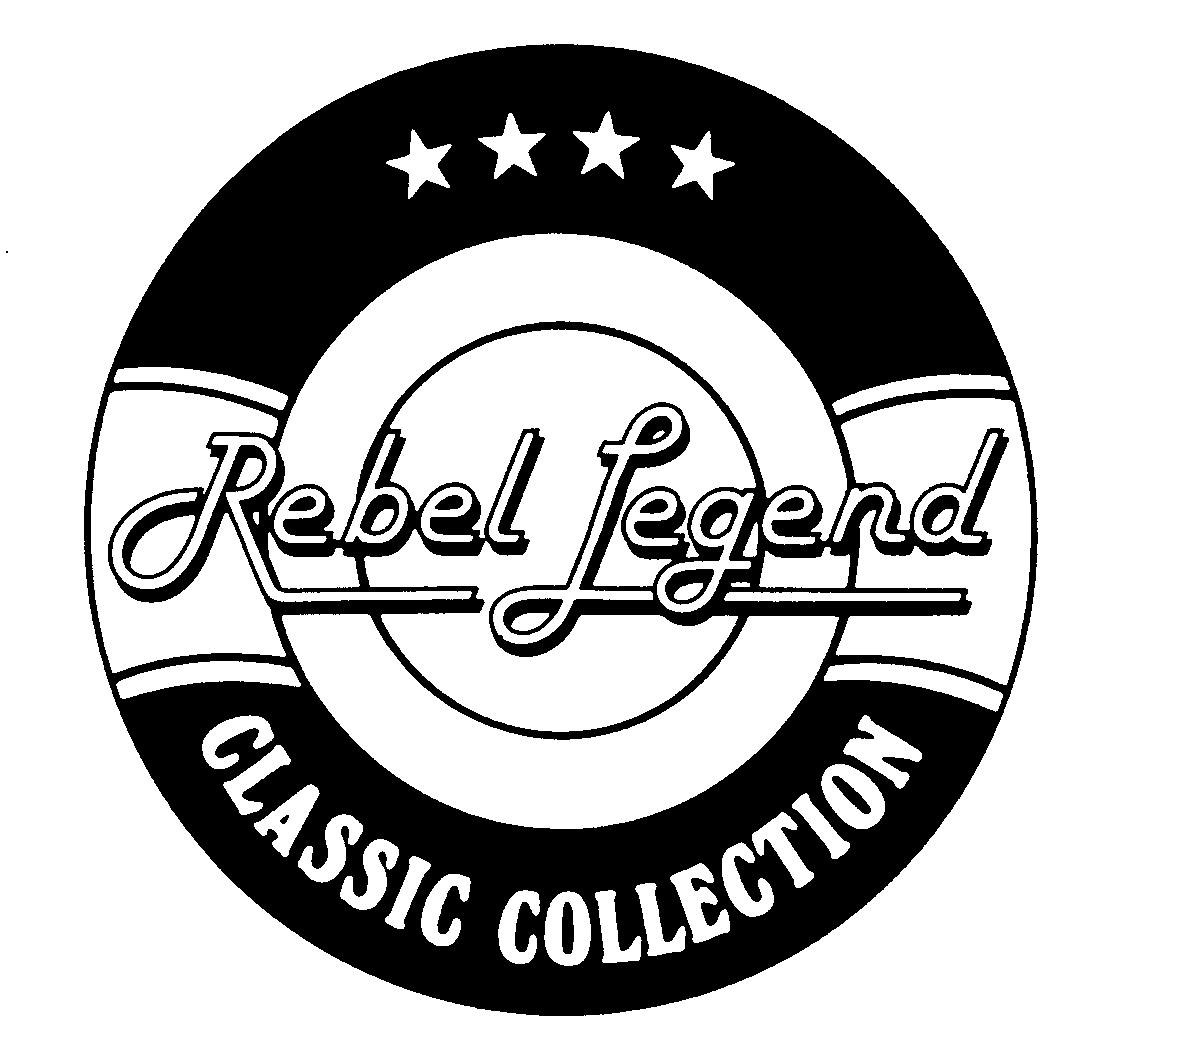  REBEL LEGEND CLASSIC COLLECTION